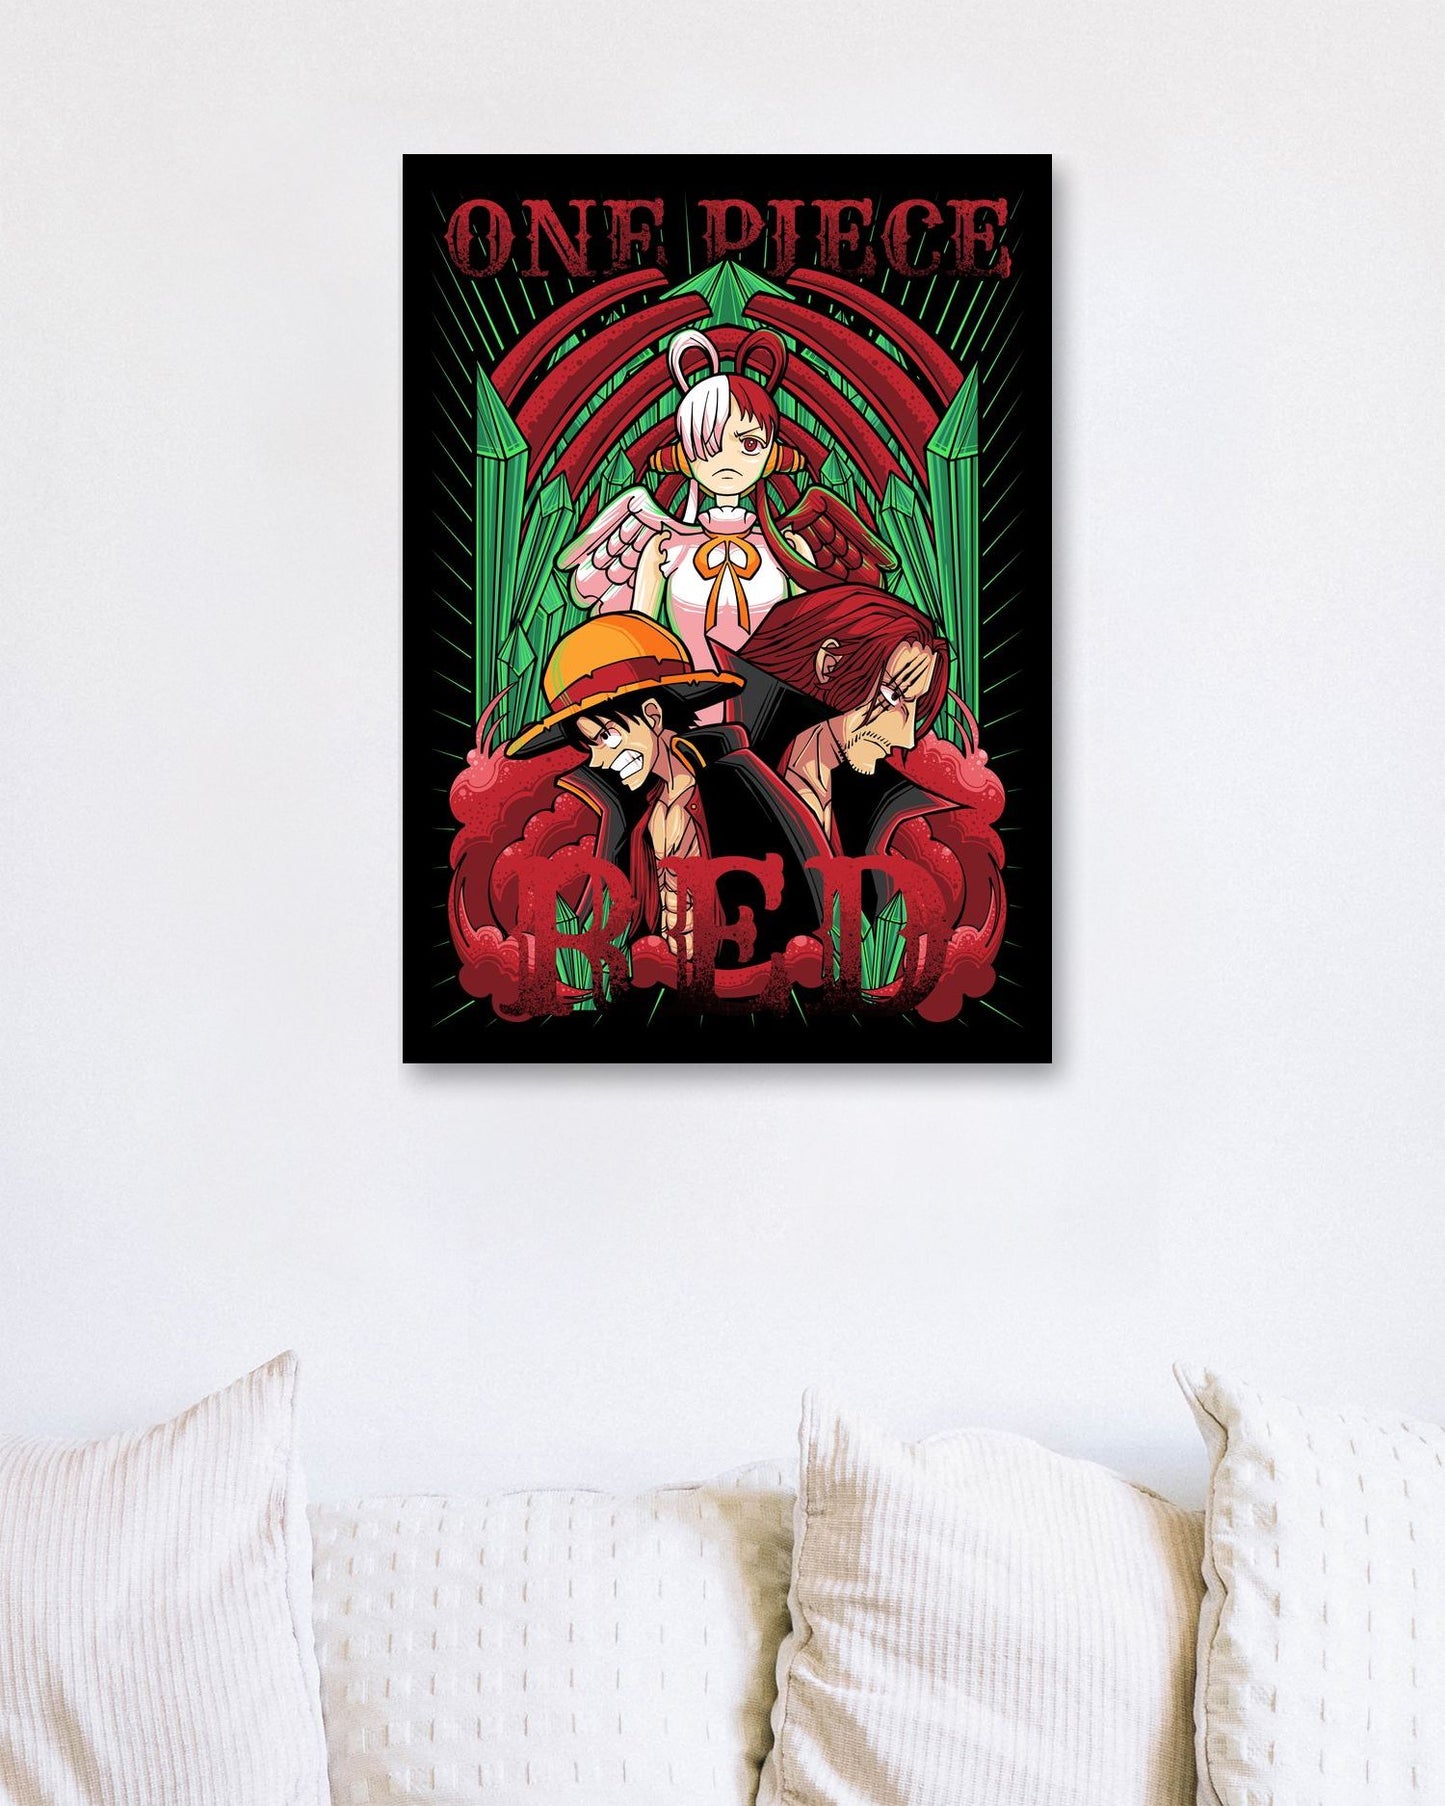 One Piece - @dhmsnm